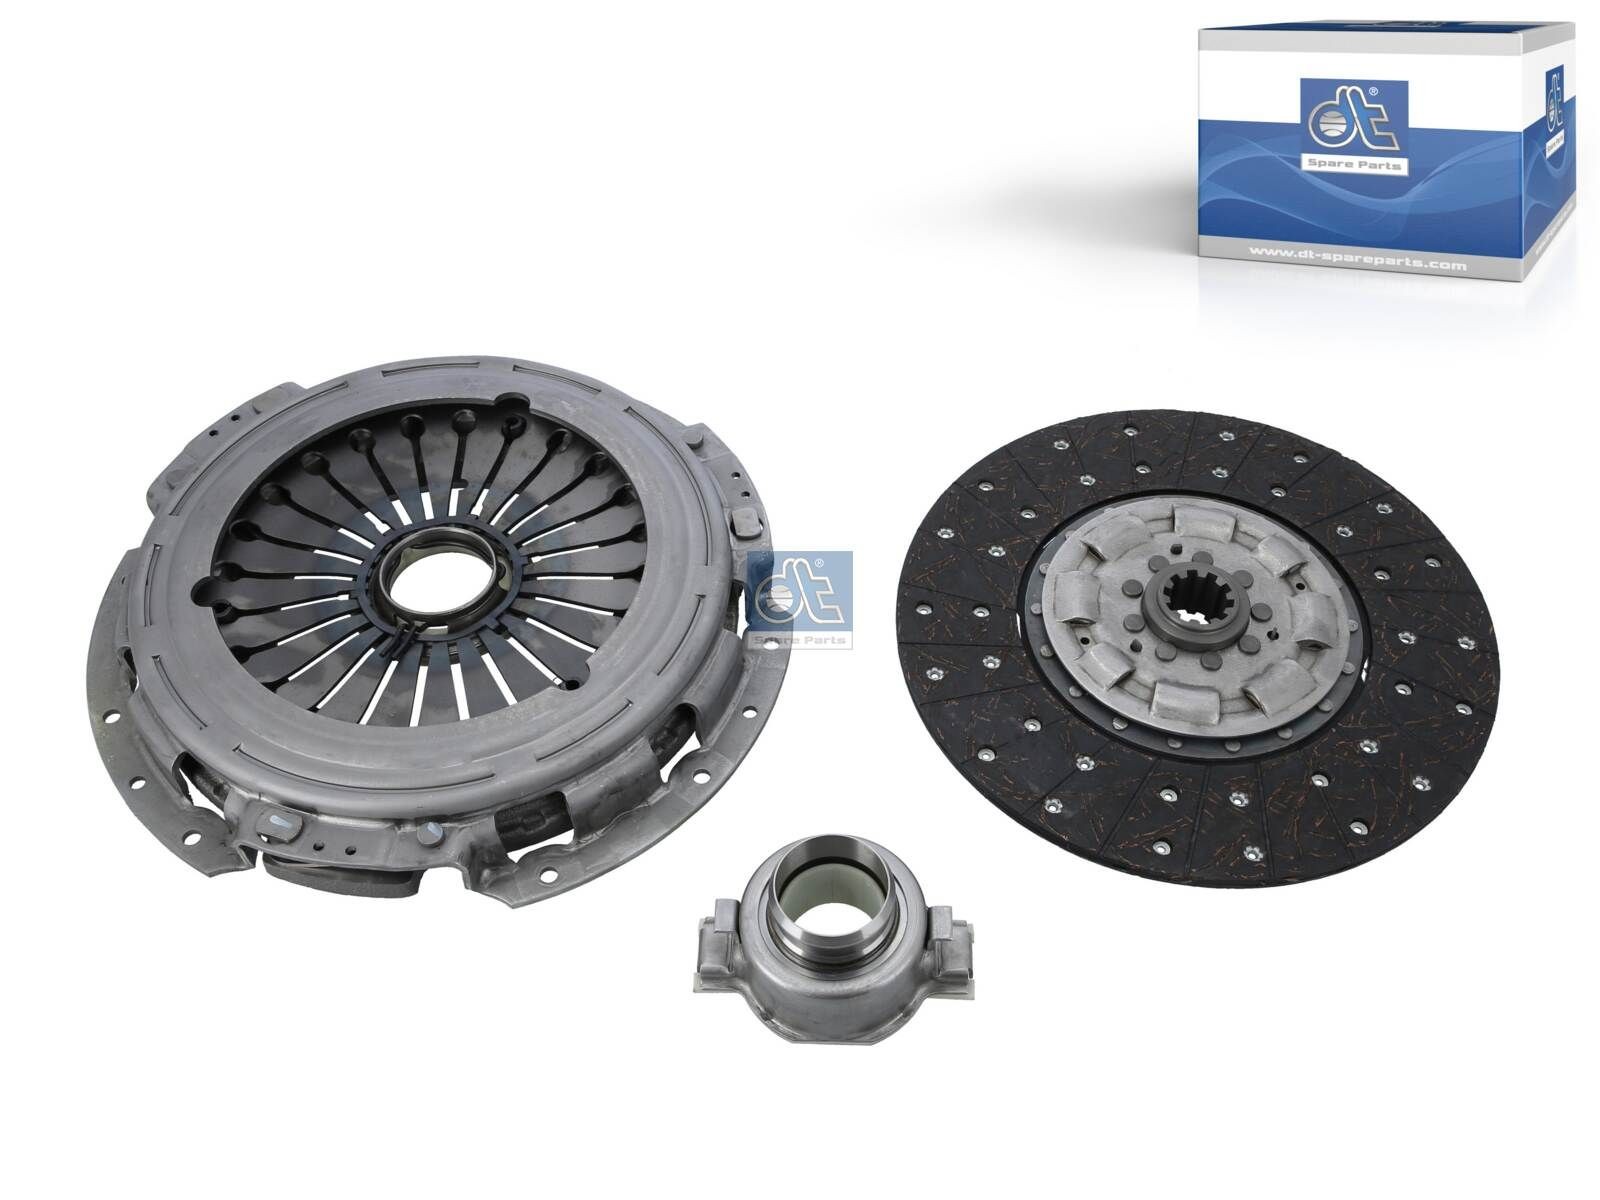 809126 DT Spare Parts 330mm Ø: 330mm Clutch replacement kit 7.90502 buy